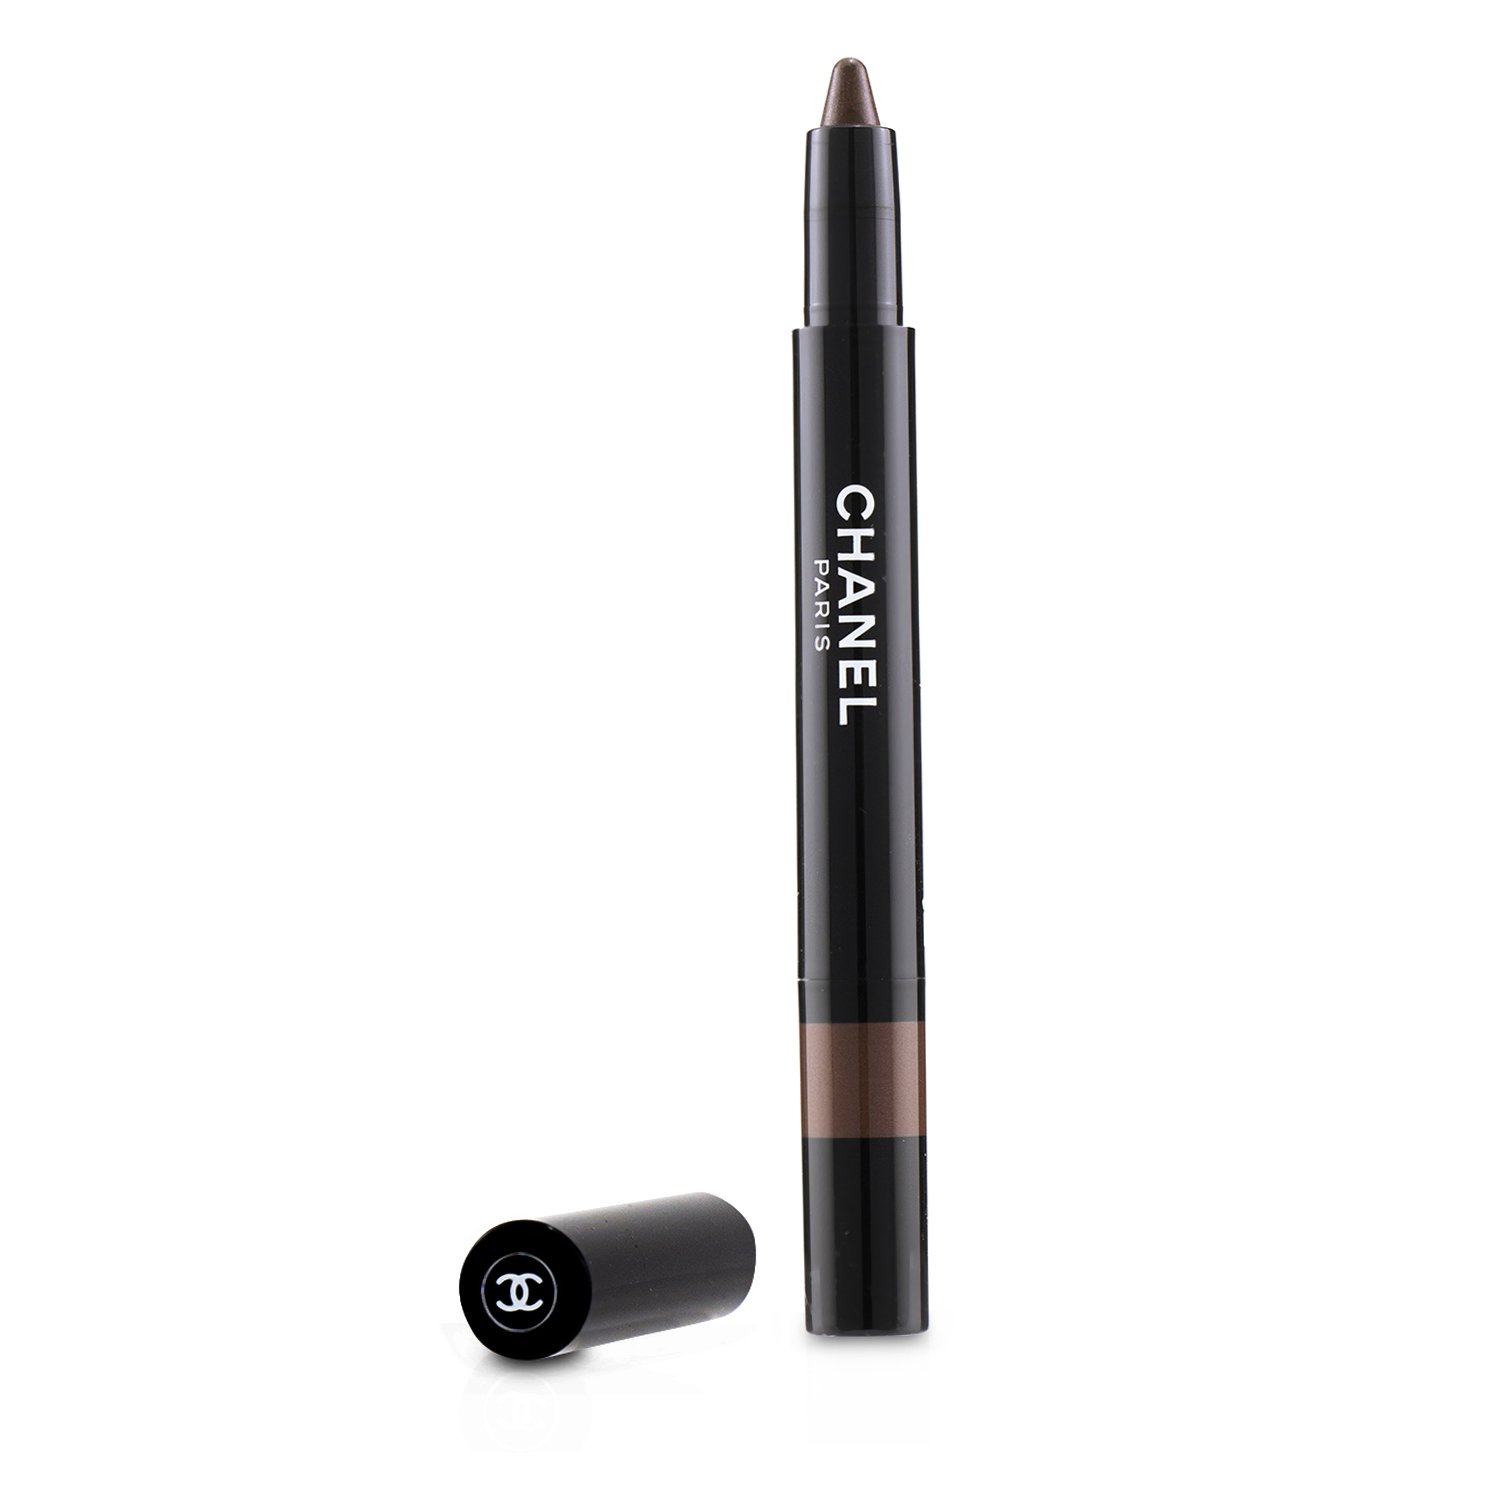 Chanel Stylo Ombre Et Contour (Eyeshadow/Liner/Khol) - # 12